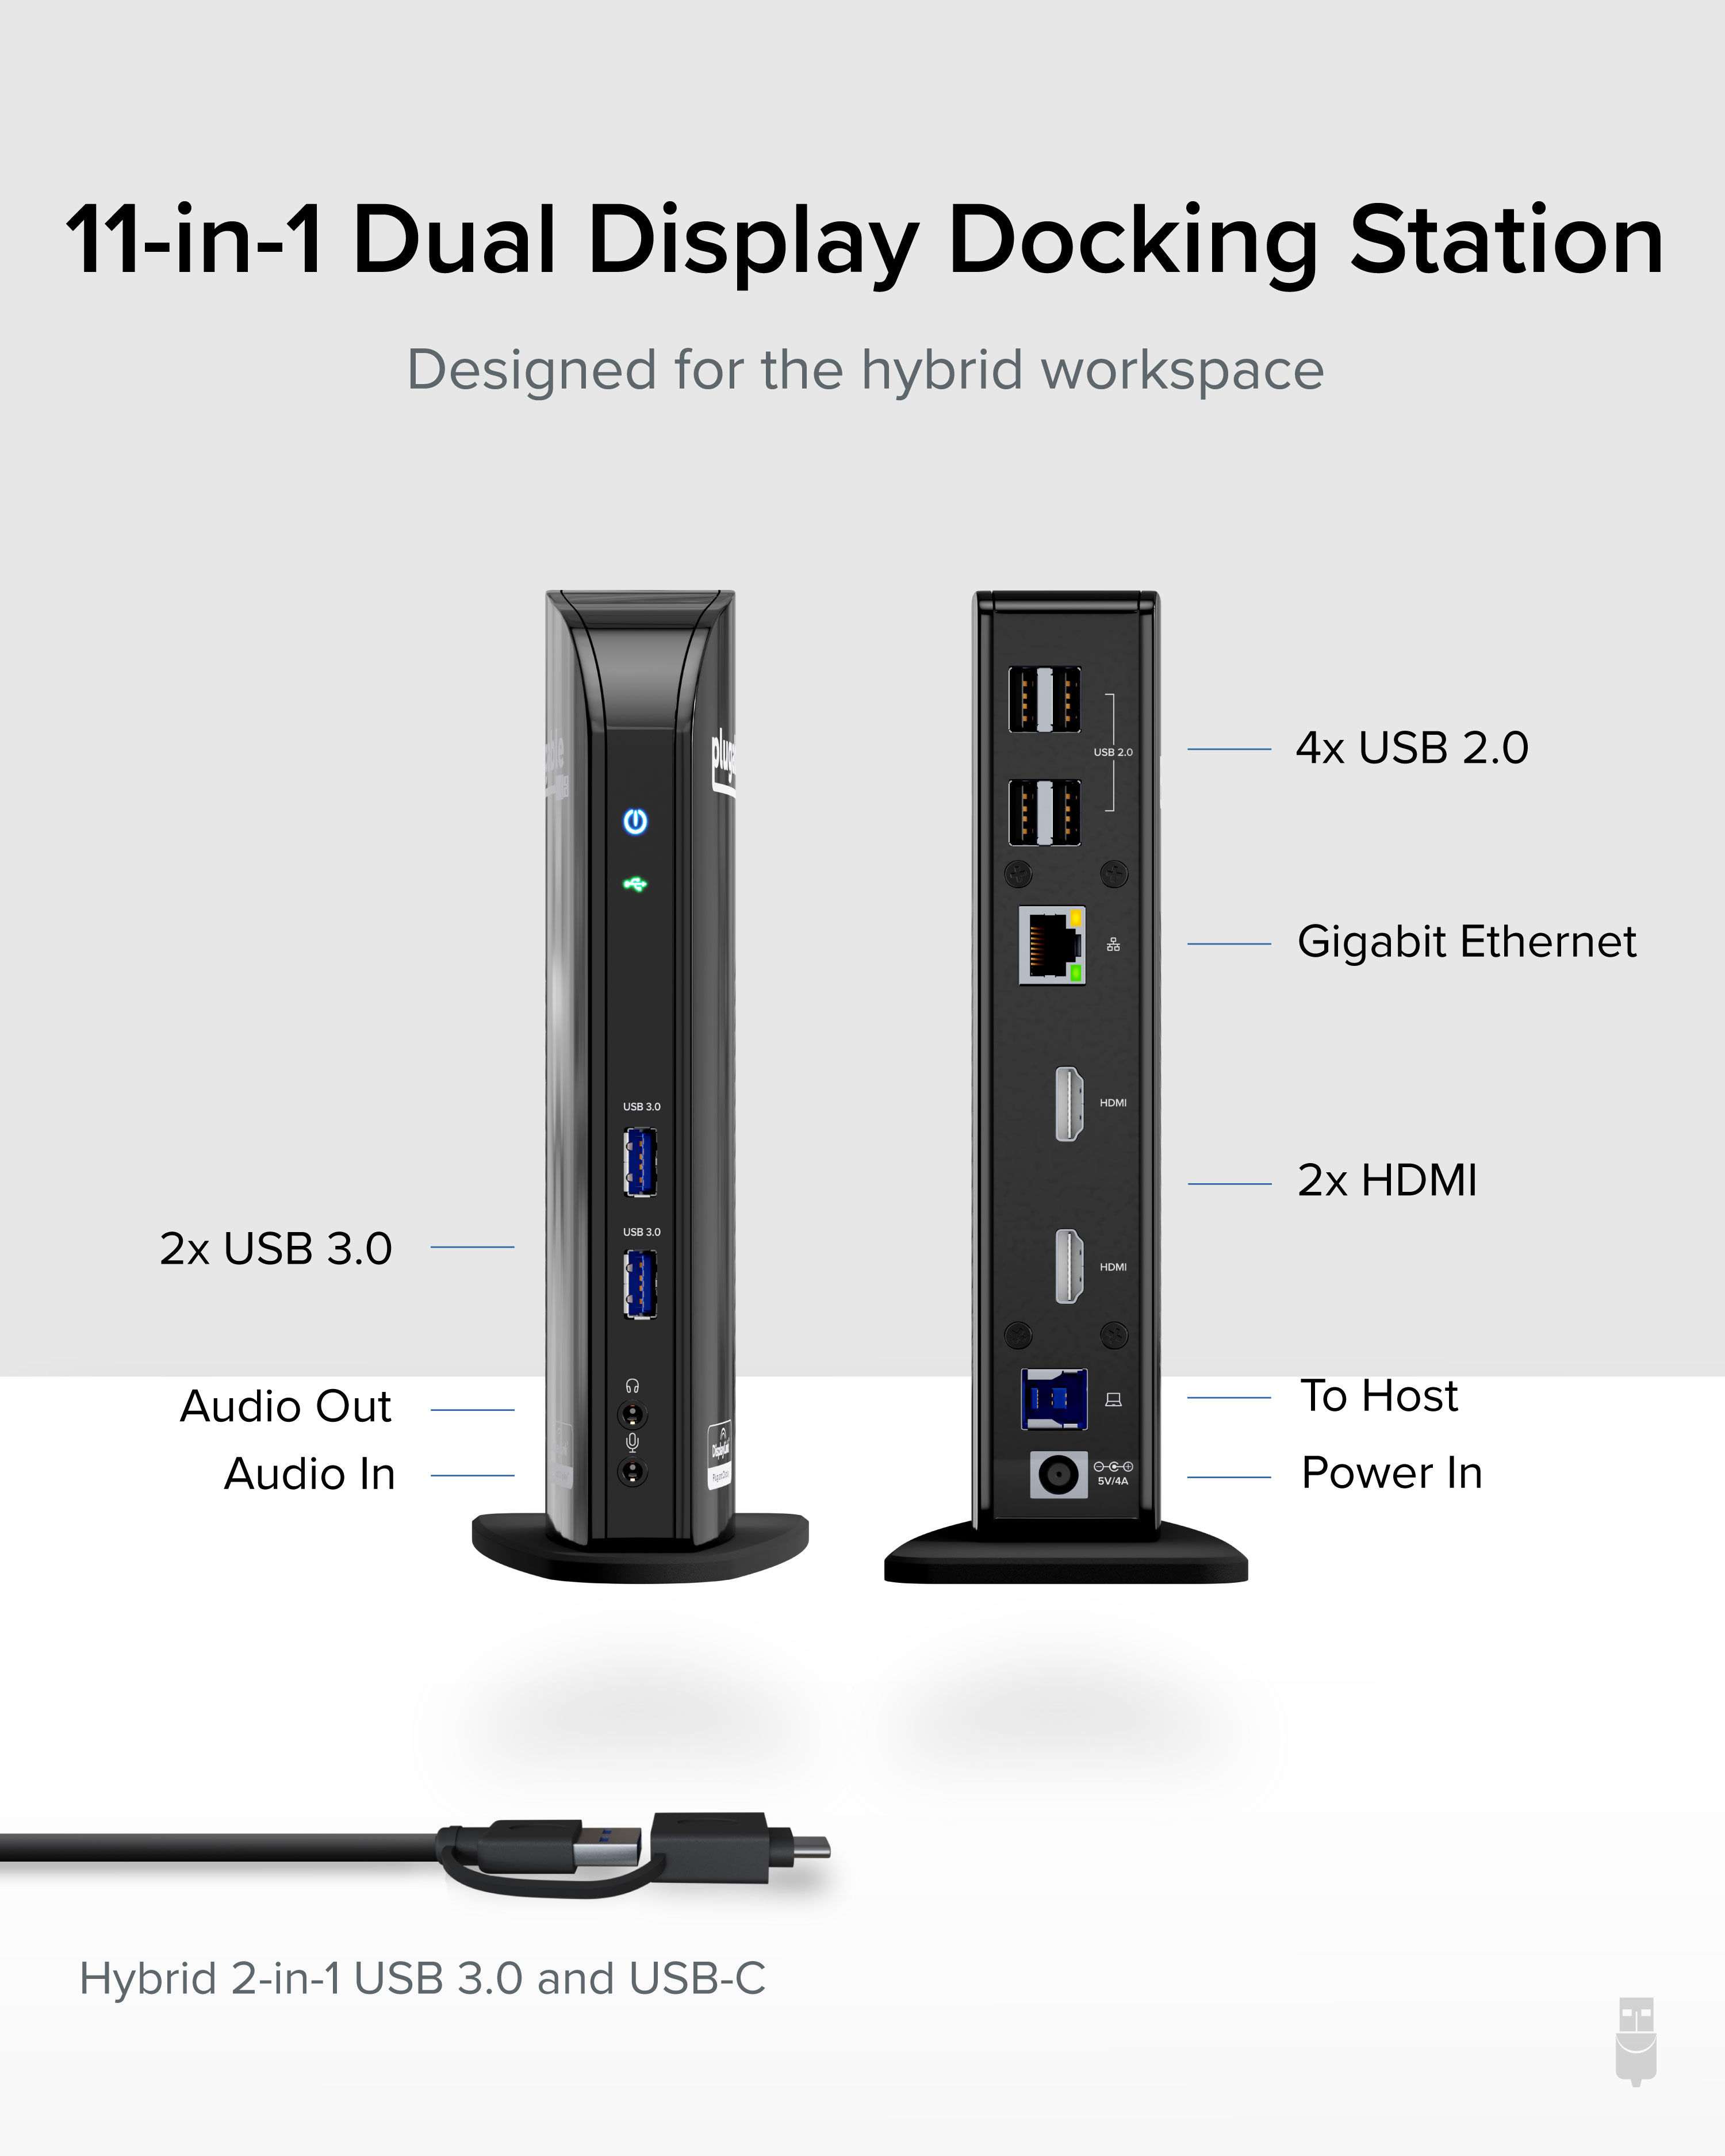 Plugable Laptop Docking Station Dual Monitor for USB-C or USB 3.0, Compatible with Windows and Mac, (Dual HDMI, 6x USB Ports, Gigabit Ethernet, Audio) - image 2 of 7